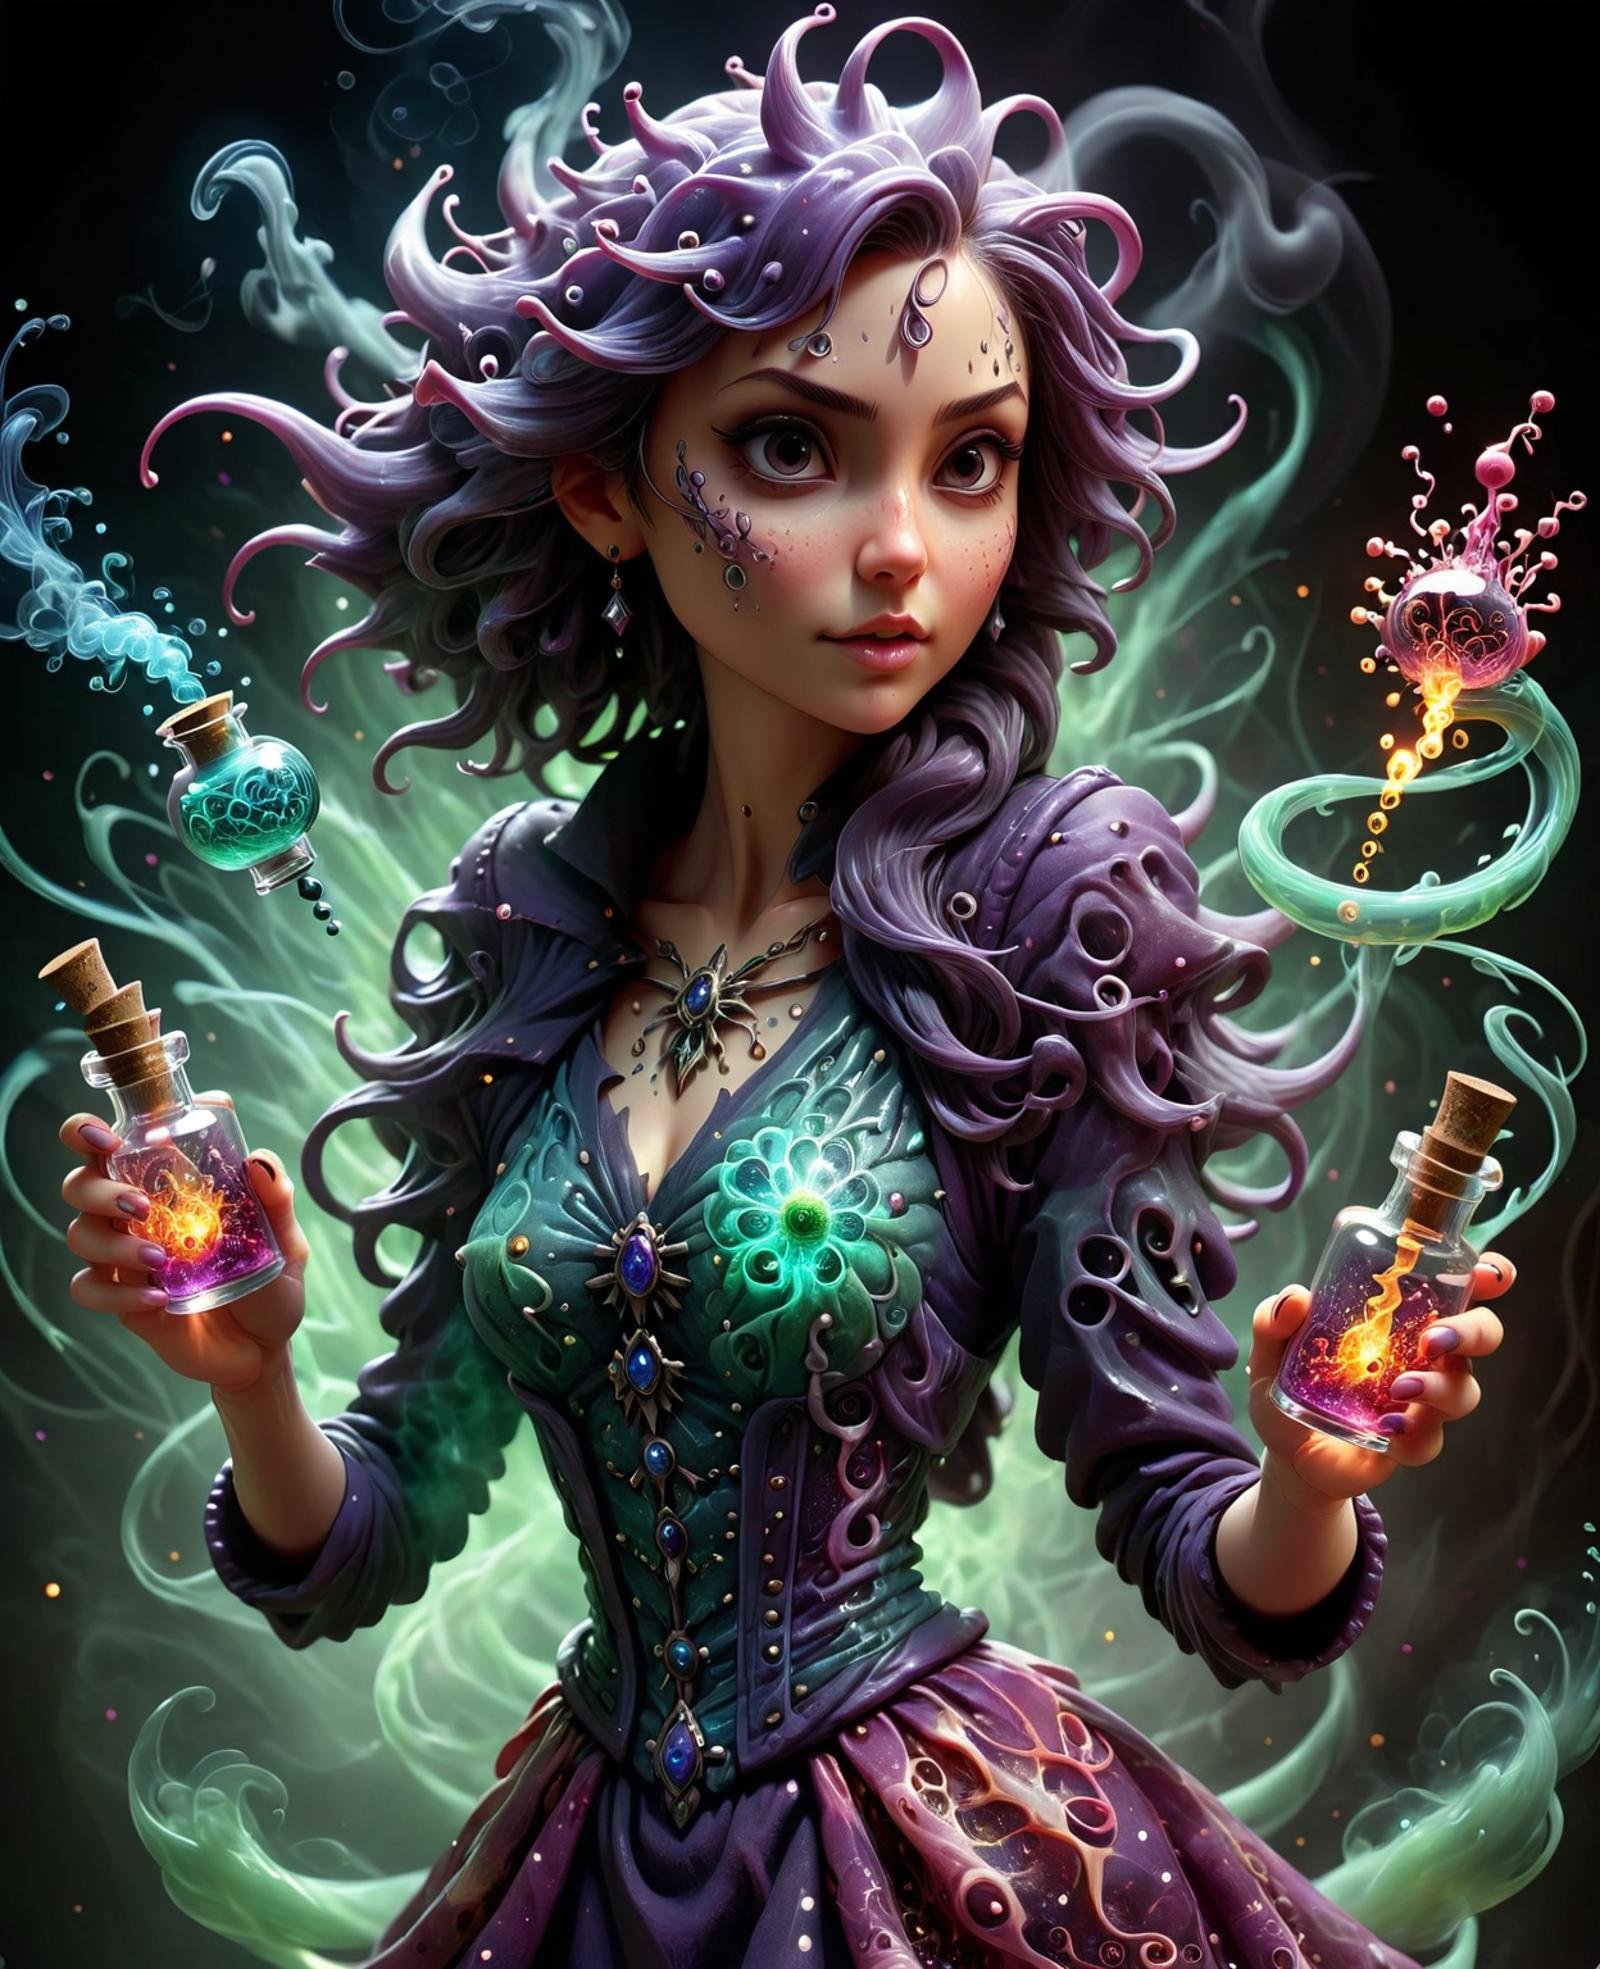 DonMV1r4lXL female spellslinger   myriad of tiny swirling vials filled with liquids of every imaginable color, glowing softly, each vial emits a unique pattern of sparkles or smoke, representing the intricate and varied effects of potion magic, air is filled with a symphony of subtle, enchanting scents, hinting at the powerful transformations contained within each concoction,    <lora:DonMV1r4lXL-000008:1>